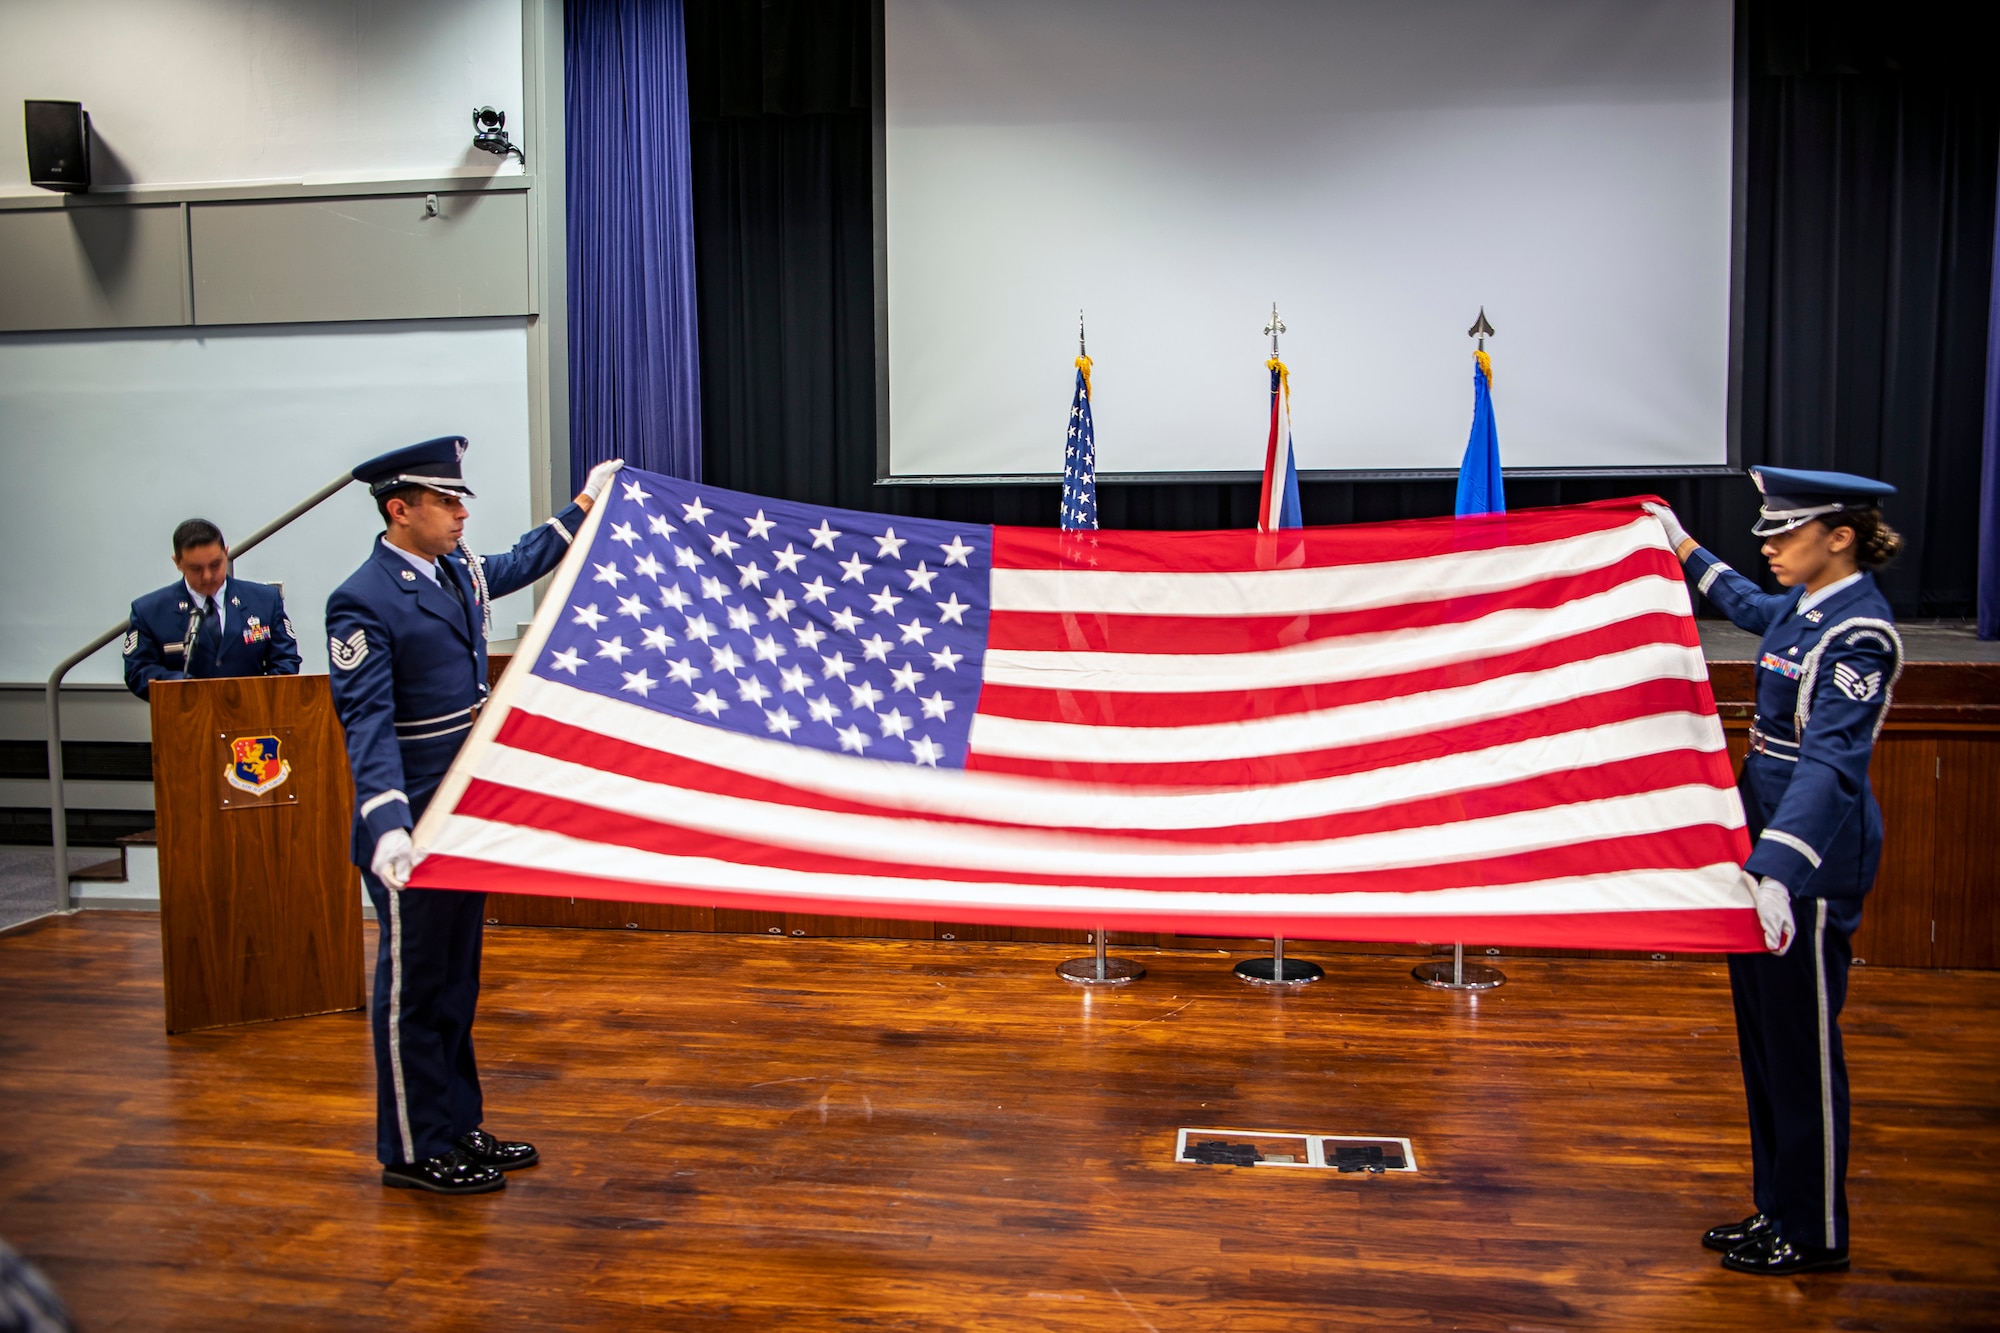 Airmen from the 422d Air Base Group honor guard, hold a flag at the table top position during a 9/11 retreat ceremony at RAF Croughton, England, Sep. 9, 2022. Airmen and guests participated in the ceremony to honor those who lost their lives during the September 11th terrorist attacks. (U.S. Air Force photo by Staff Sgt. Eugene Oliver)